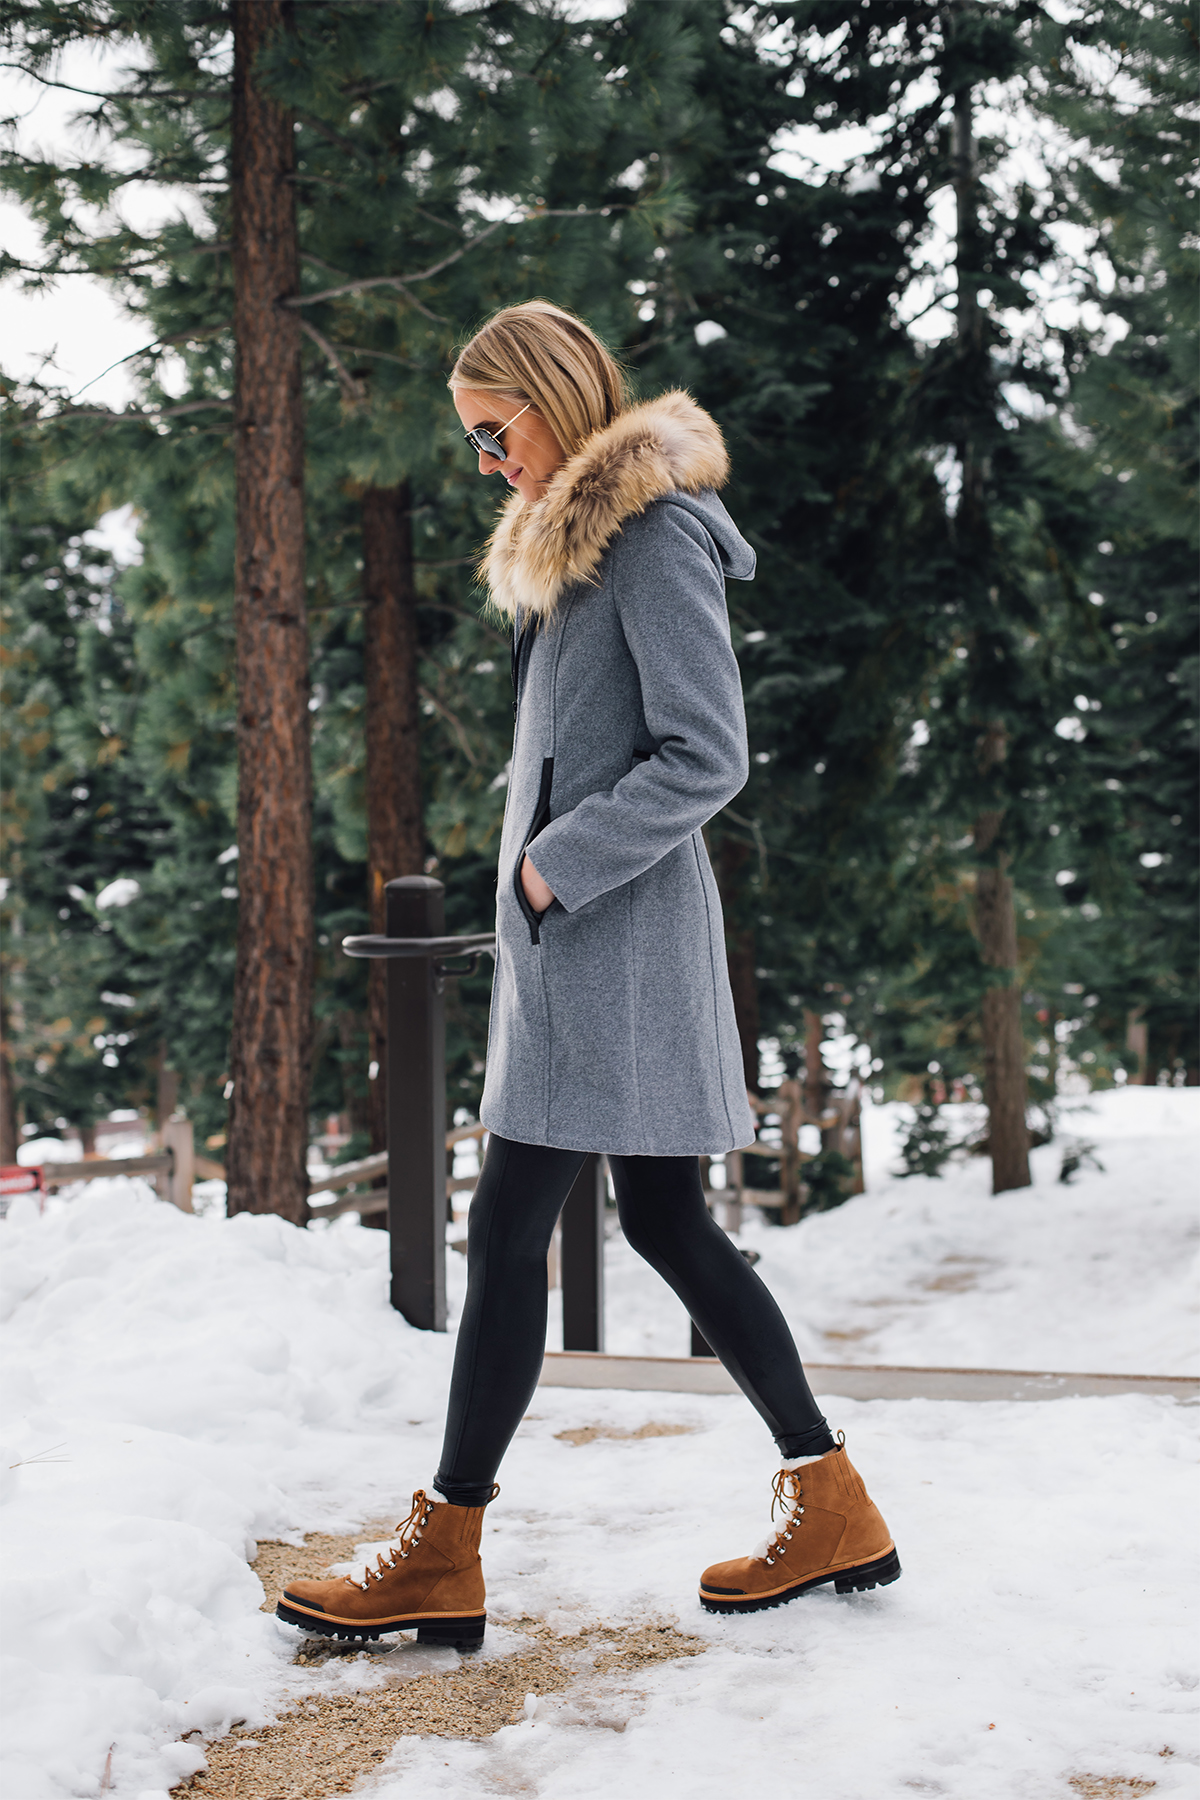 Blonde Woman Wearing Grey Wool Coat with Faux Fur Hood Spanx Black Faux Leather Leggings Brown Shearling Booties Outfit Fashion Jackson San Diego Fashion Blogger Lake Tahoe Winter Outfit